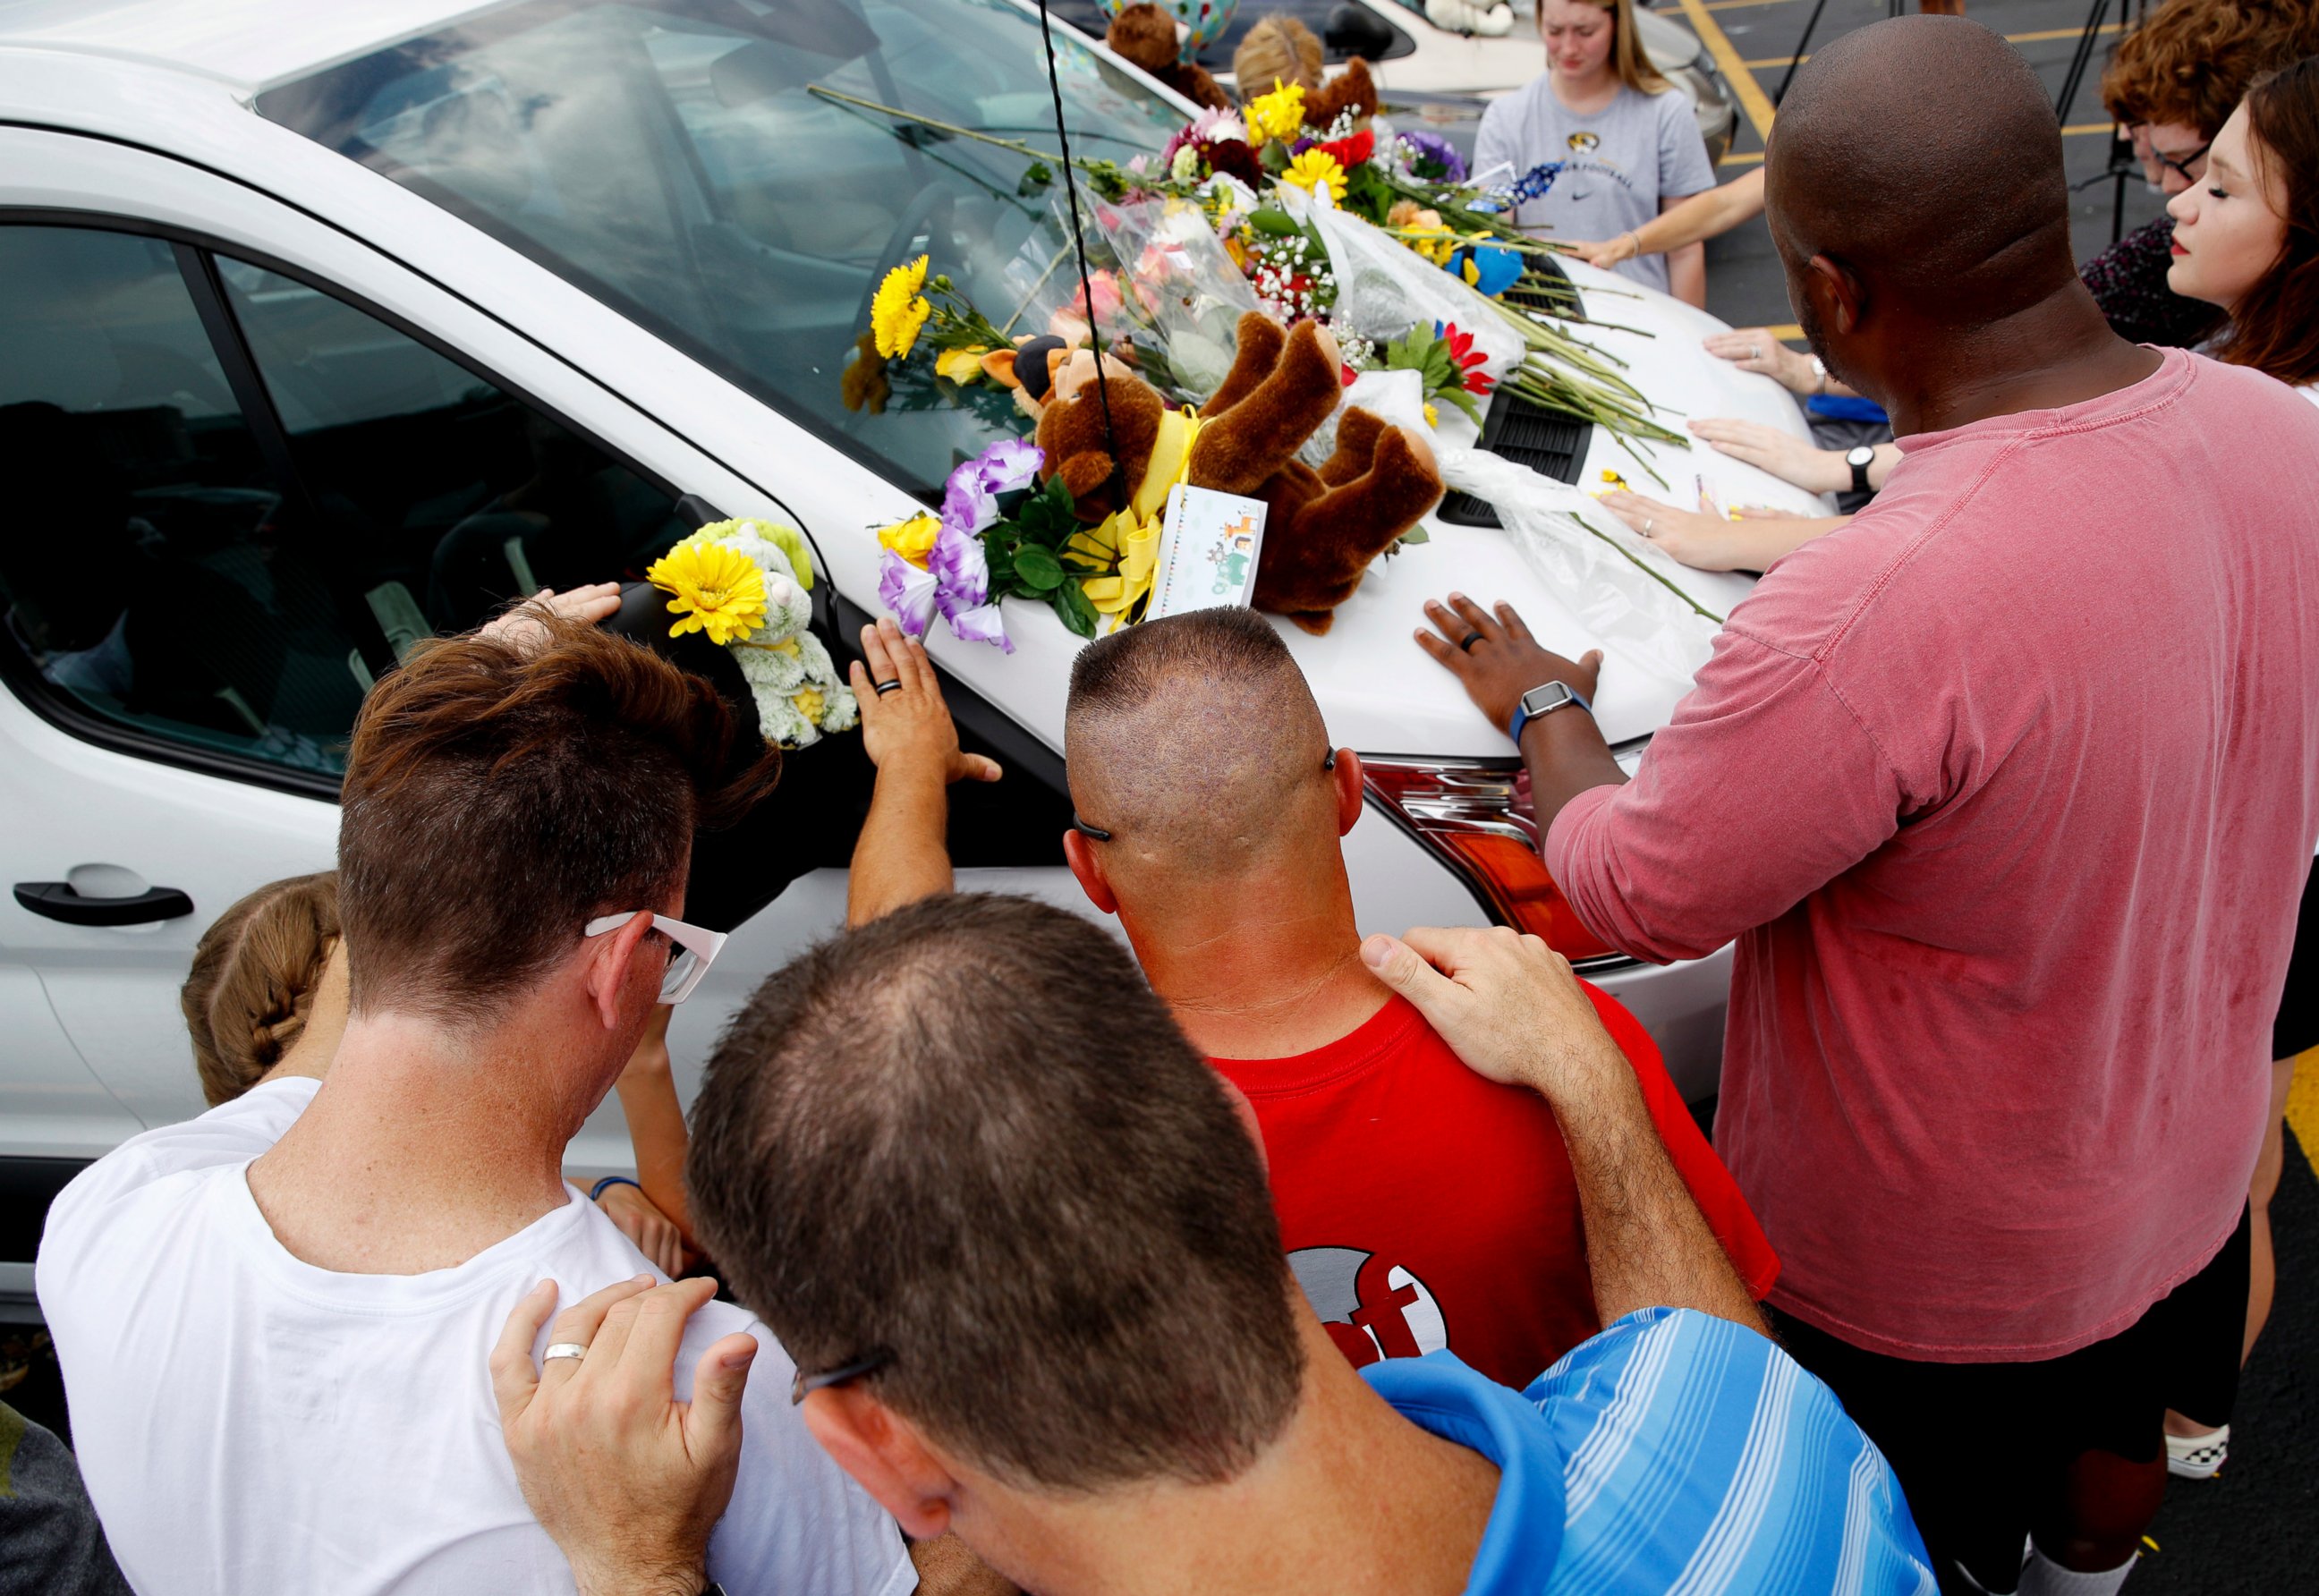 People pray around a van believed to belong to victims of a duck boat accident in the parking lot of the business running the boat tours Friday, July 20, 2018 in Branson, Mo.